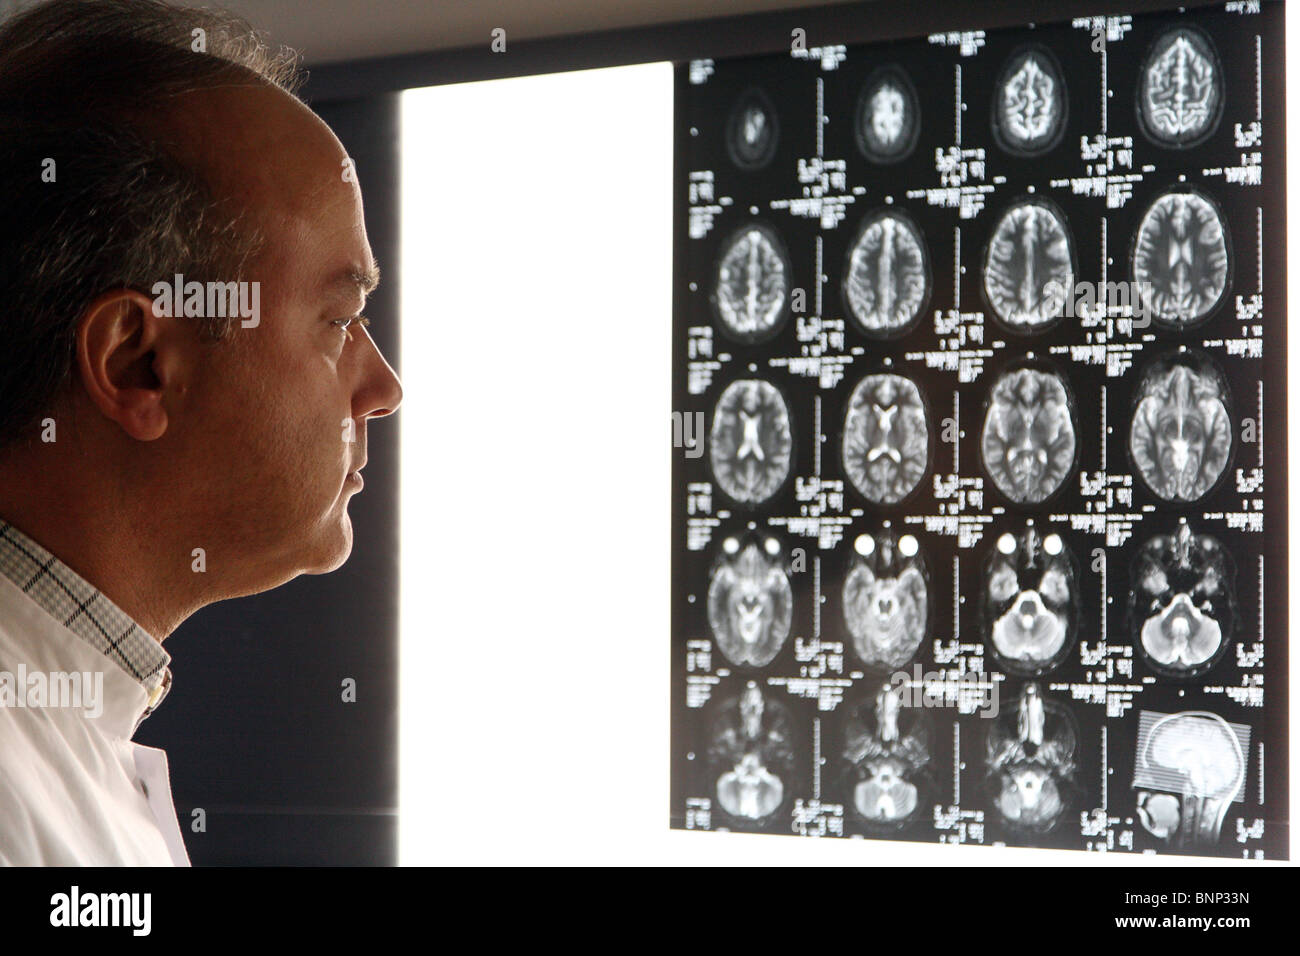 Thomas Muehlberger MD takes a look at MRI images of the head Stock Photo